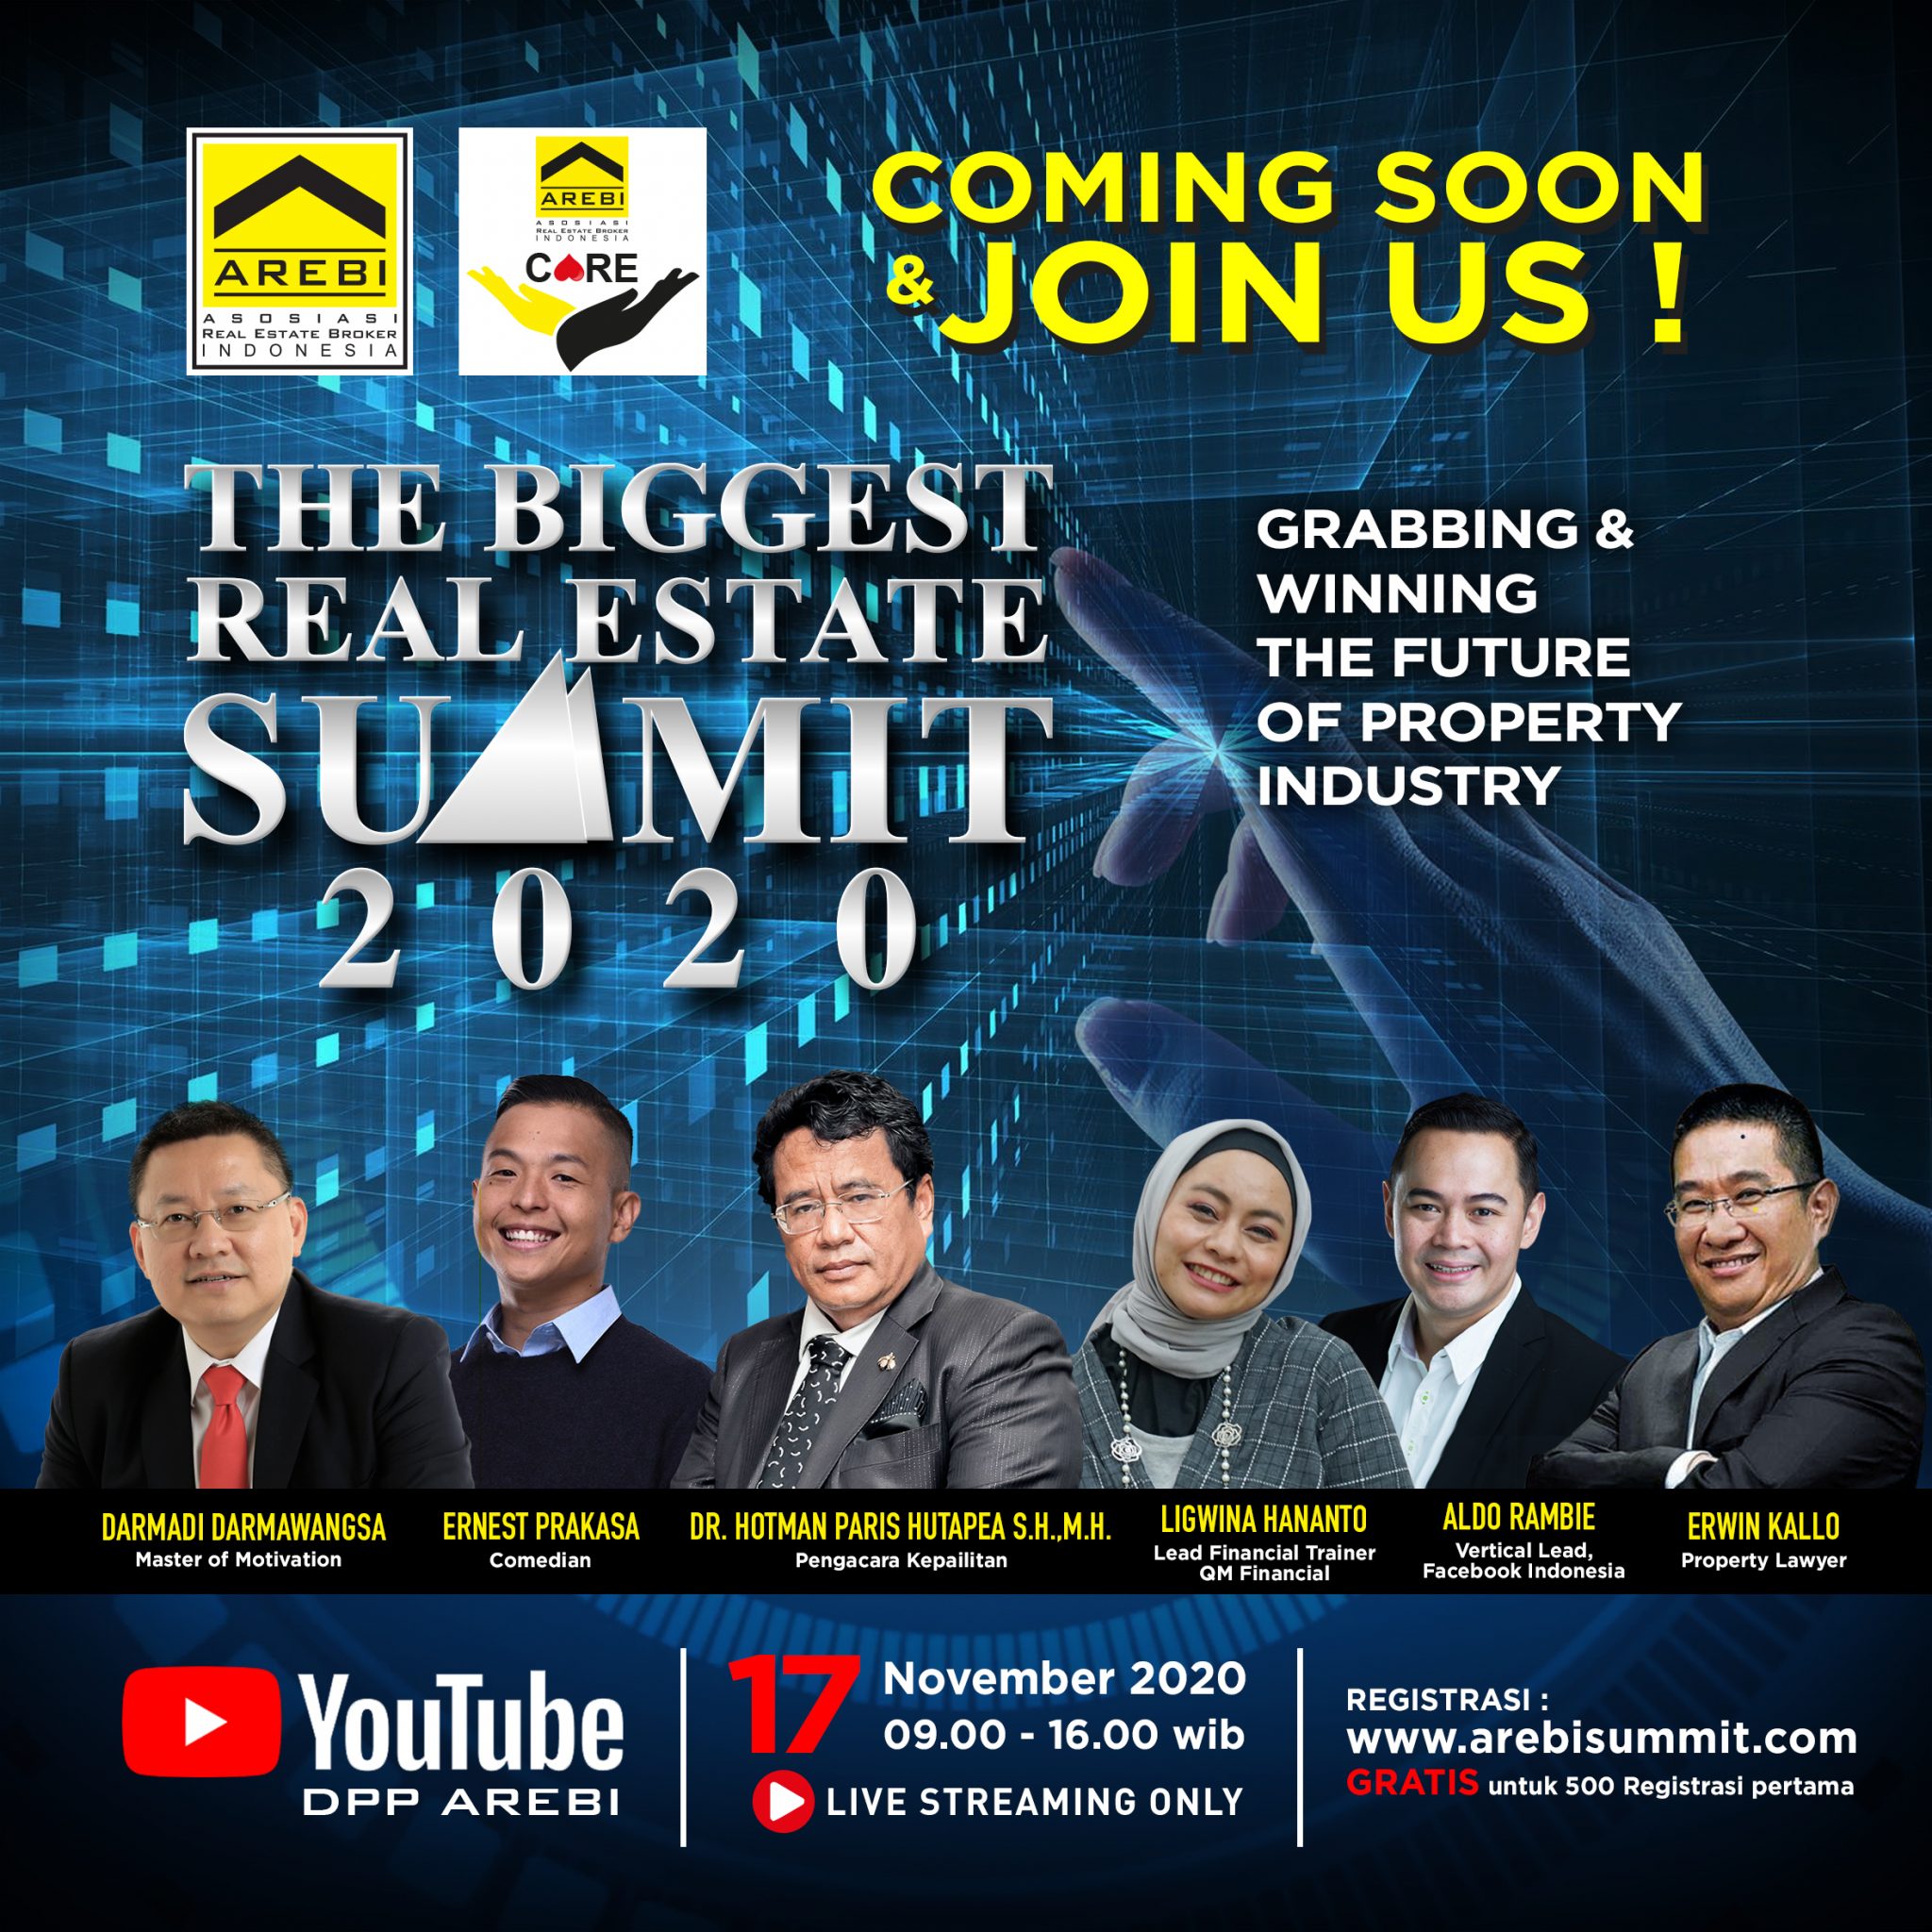 The Biggest Real Estate Summit 2020